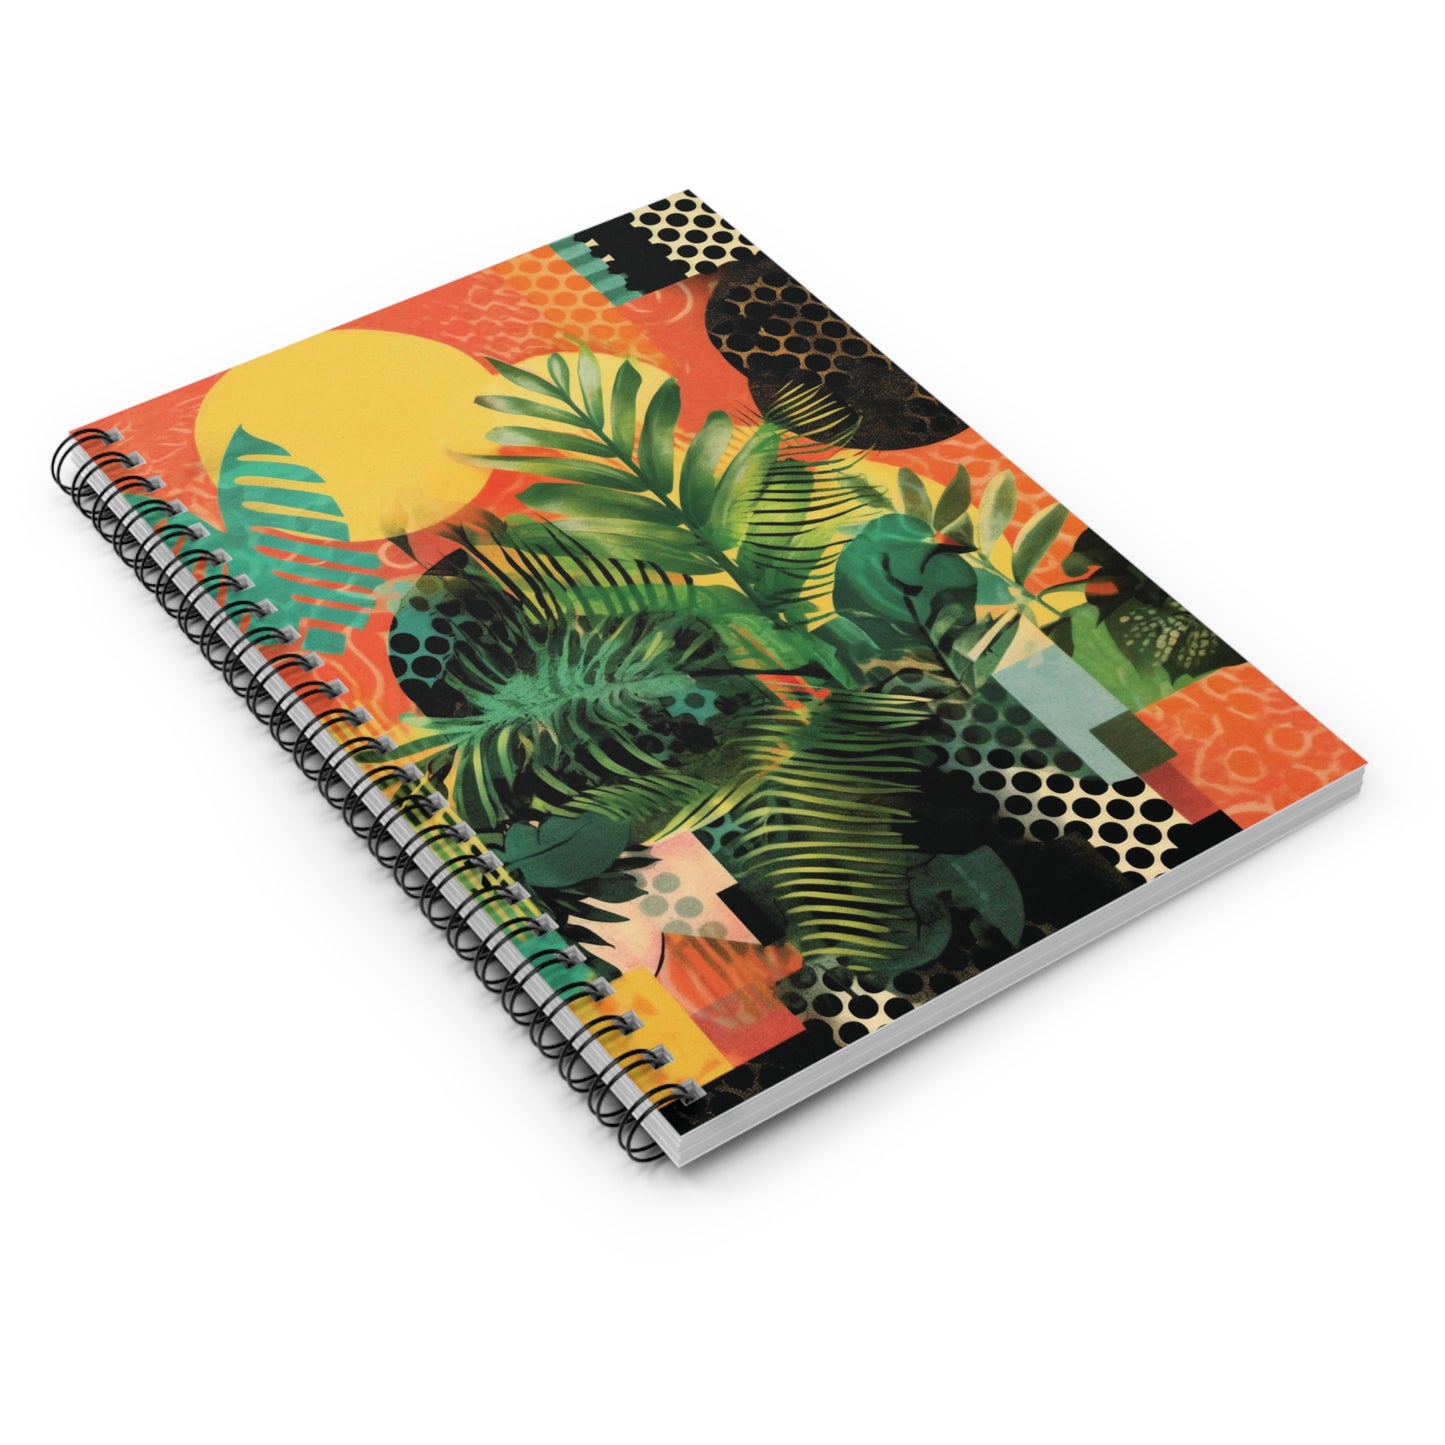 Foliage Collage Art Notebook (4) - Composition Notebook, Spiral Notebook, Journal for Writing and Note-Taking